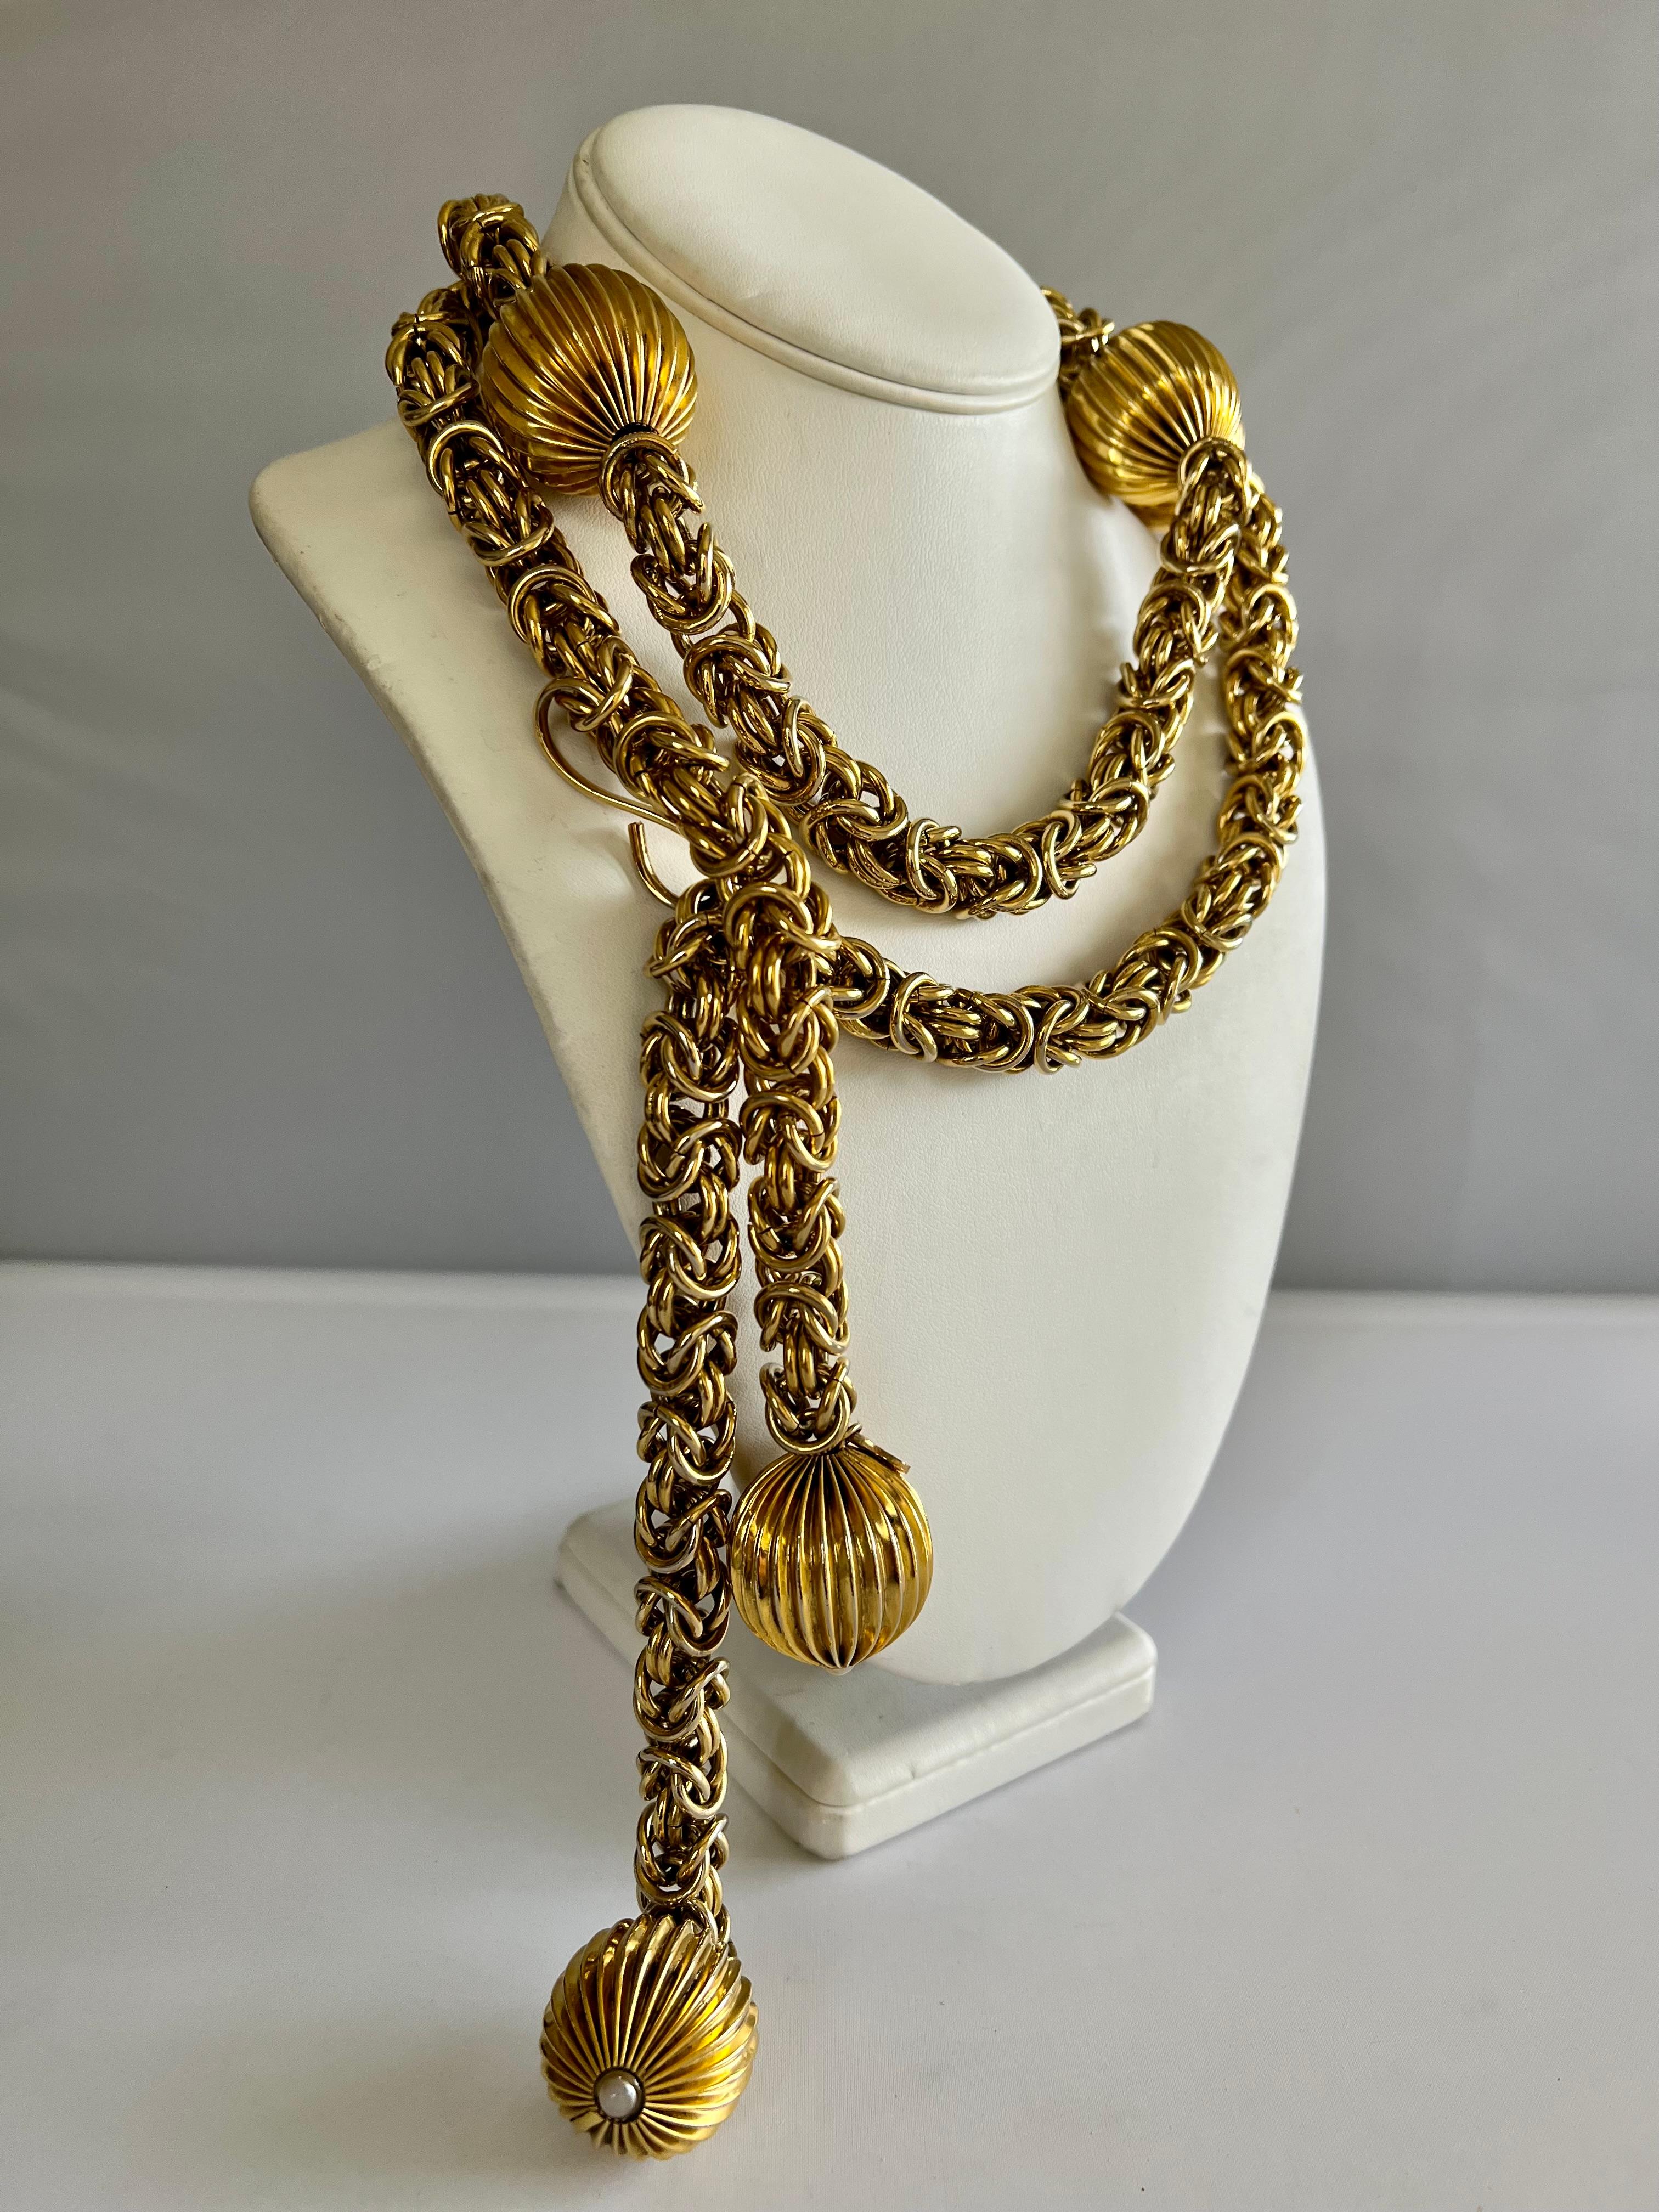 Phenomenal vintage Yves Saint Laurent Rive Gauche chunky woven gold chain and ball belt/necklace - signed YSL Rive Gauche. 